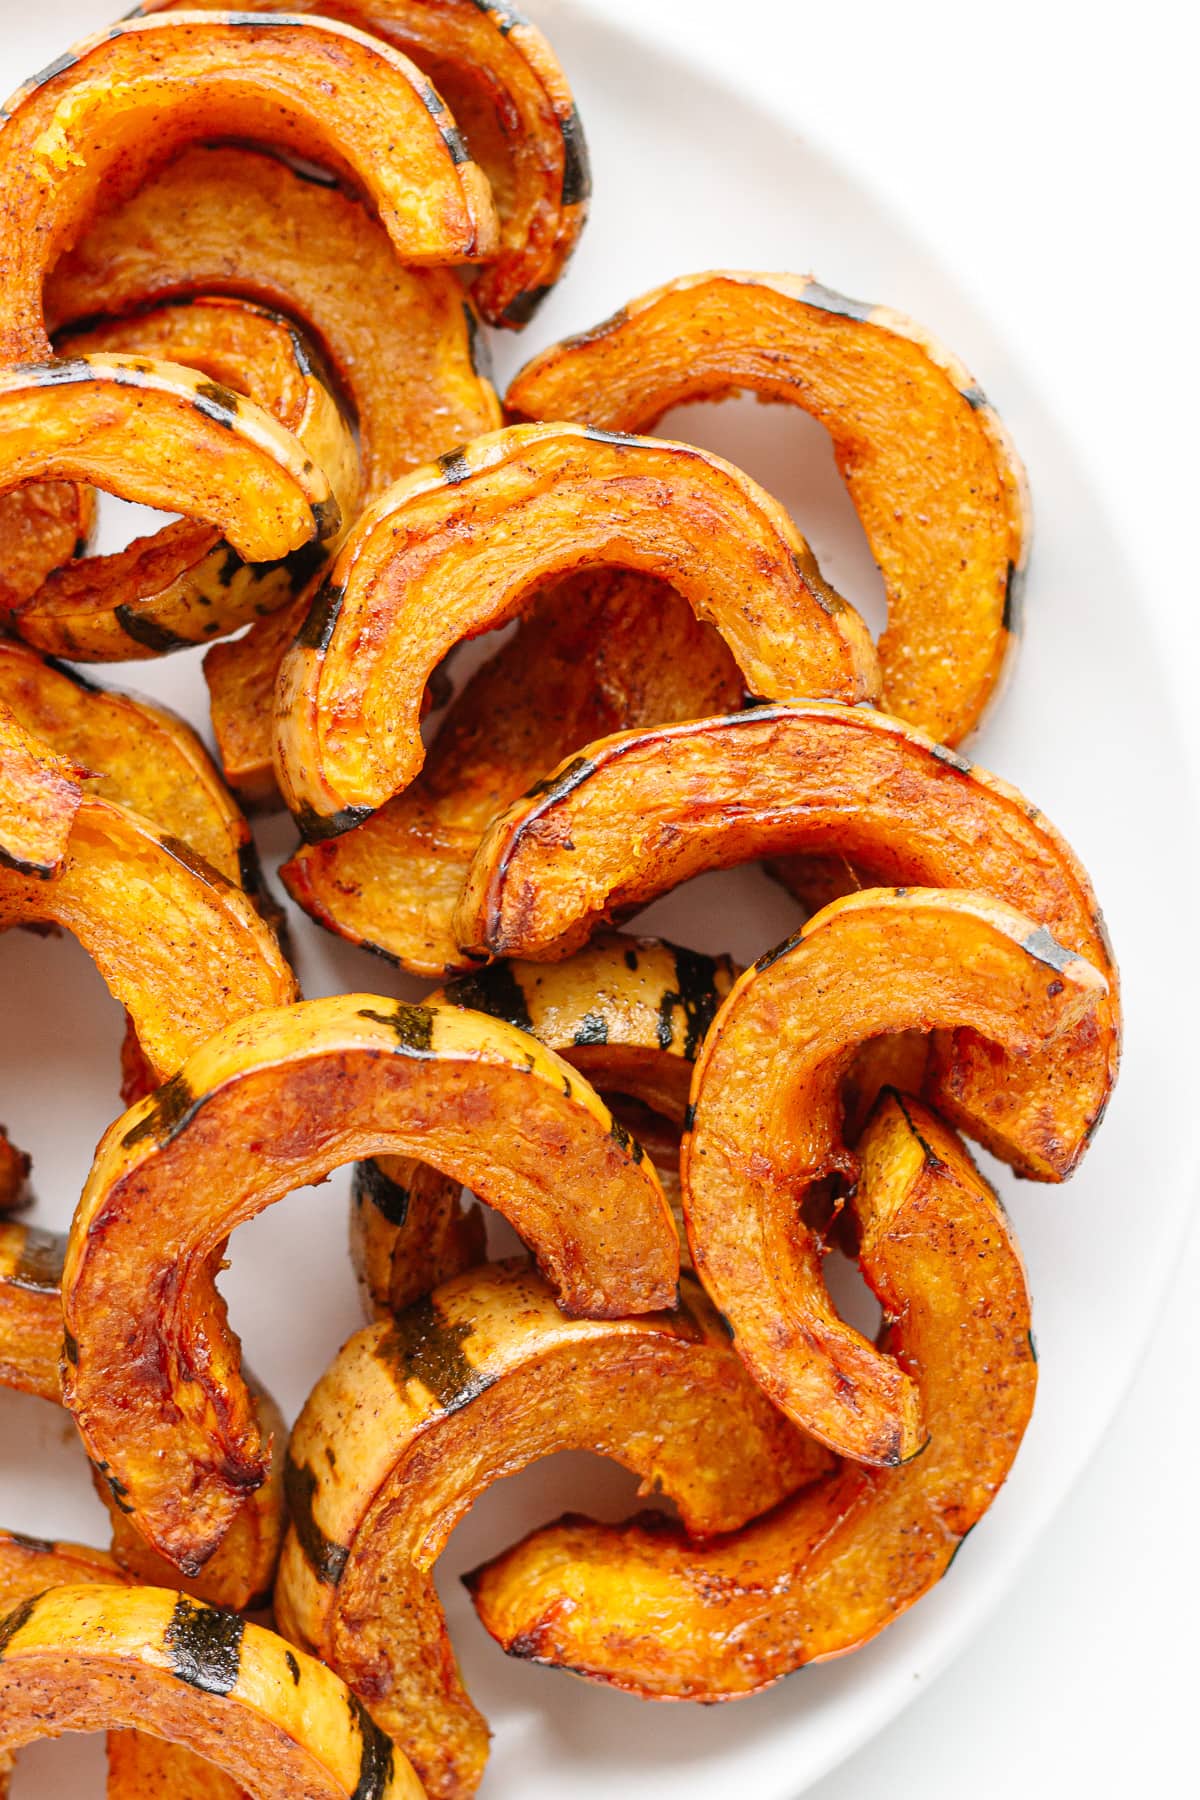 Oven roasted delicata squash slices on a white plate.